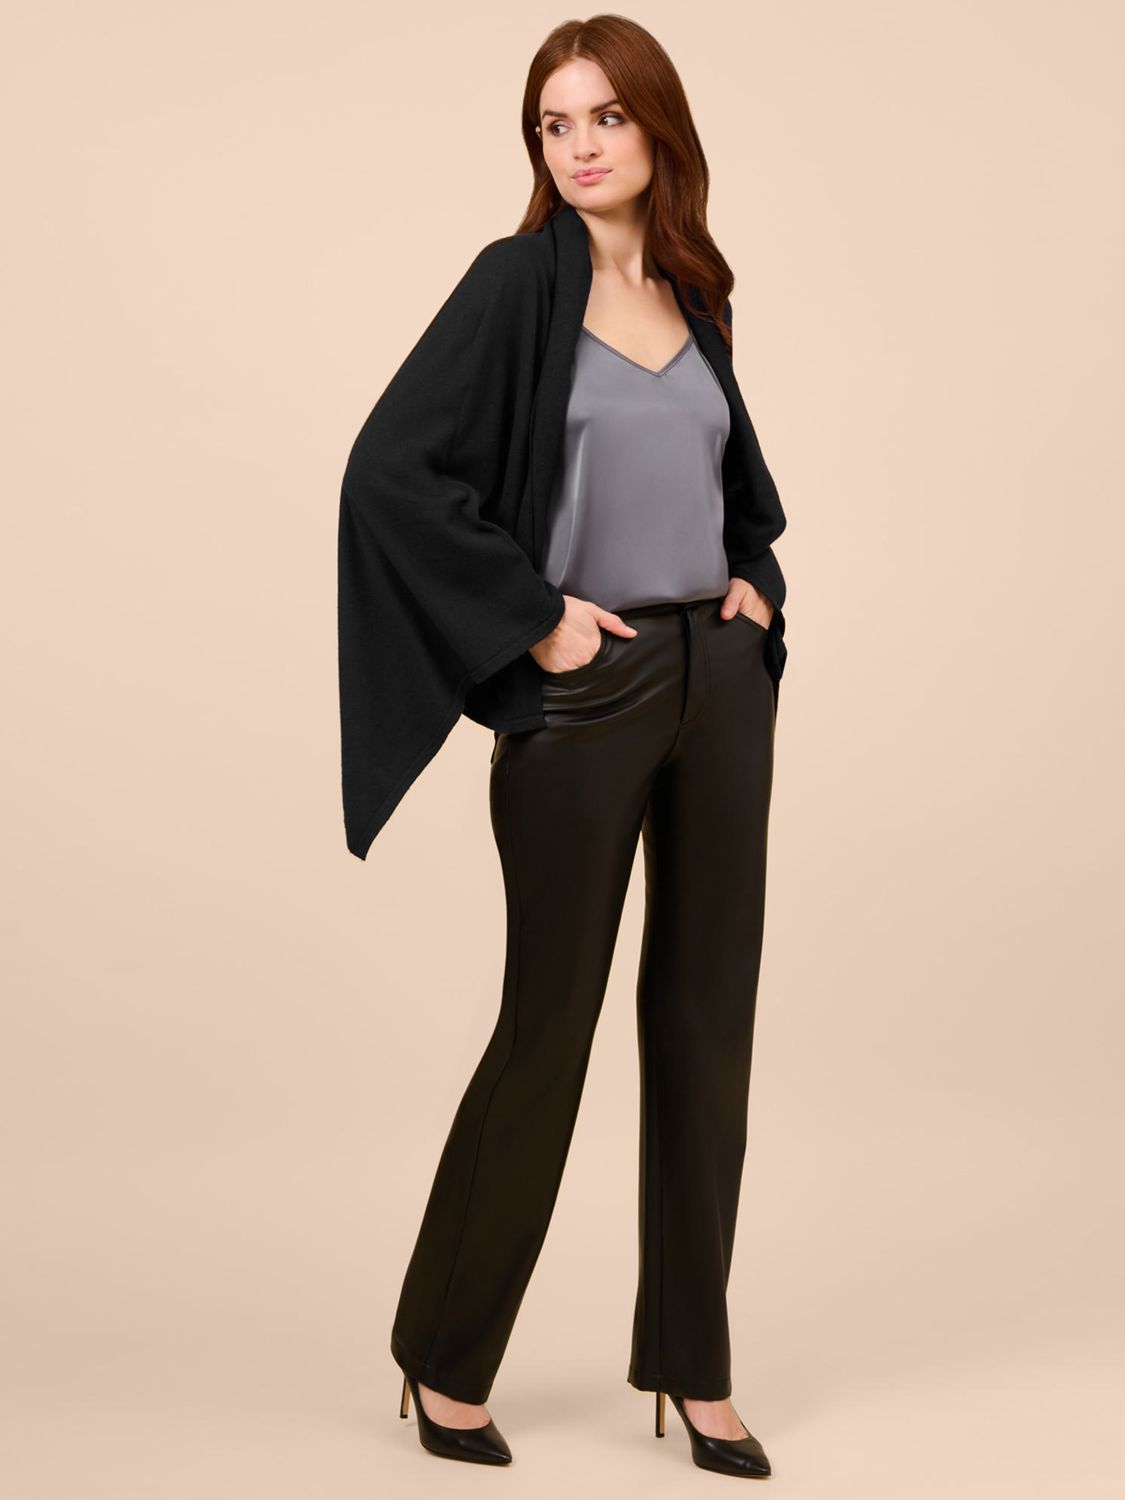 Adrianna Papell Classic Solid Cashmere Blend S’HUG® Cardigan Wrap, Black, XS-S